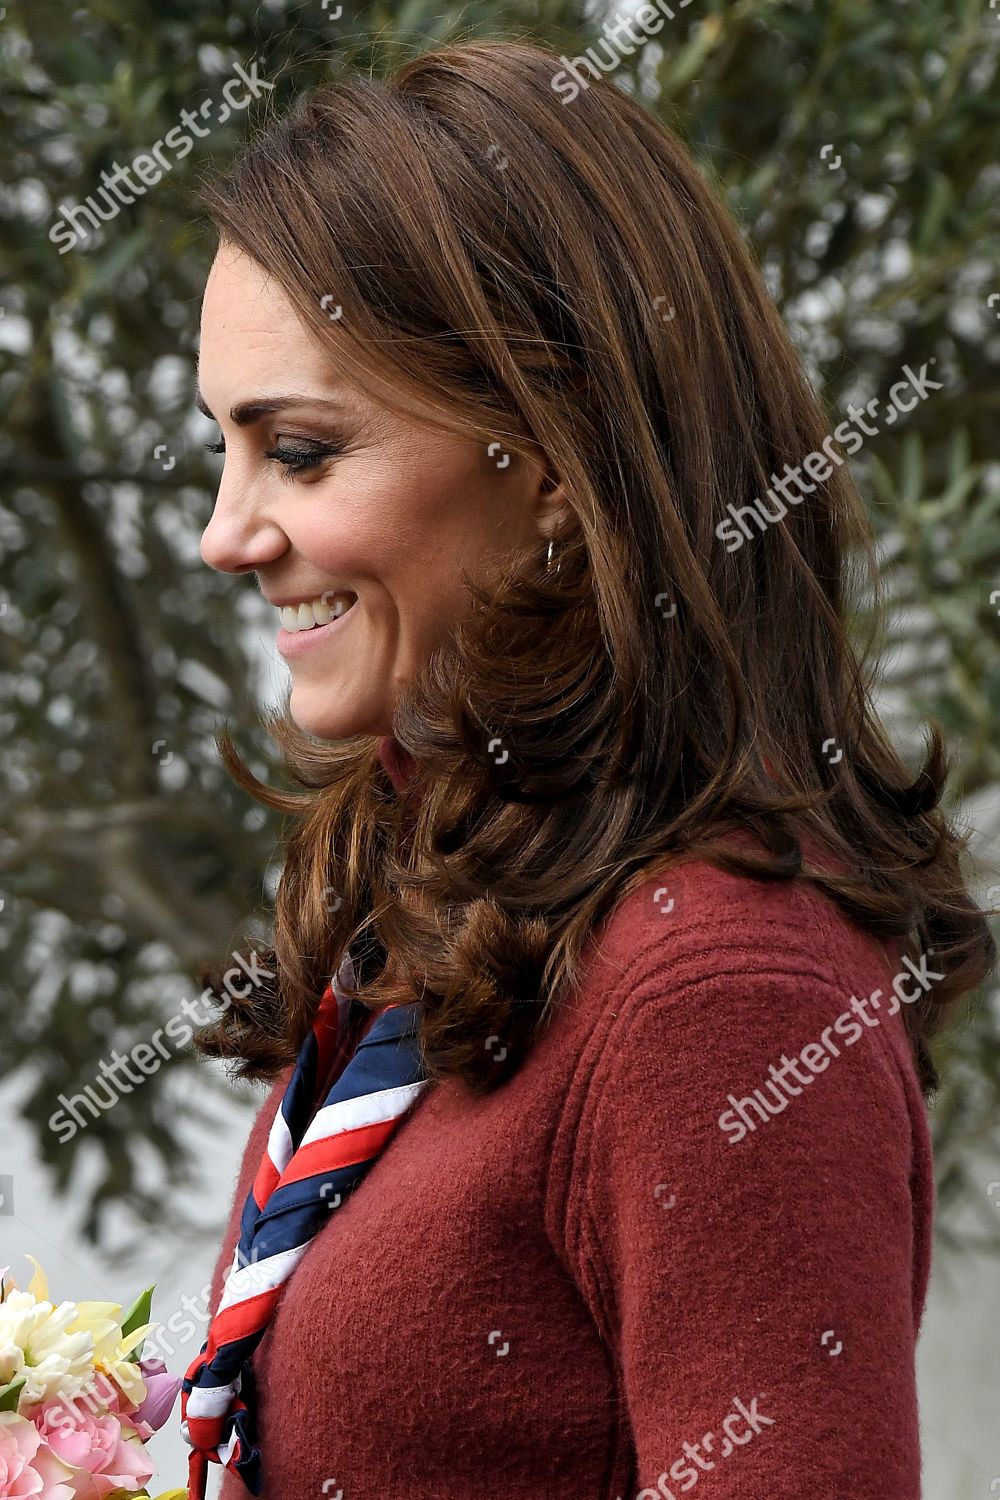 catherine-duchess-of-cambridge-visit-to-the-scouts-headquarters-gilwell-park-essex-uk-shutterstock-editorial-10179979cm.jpg